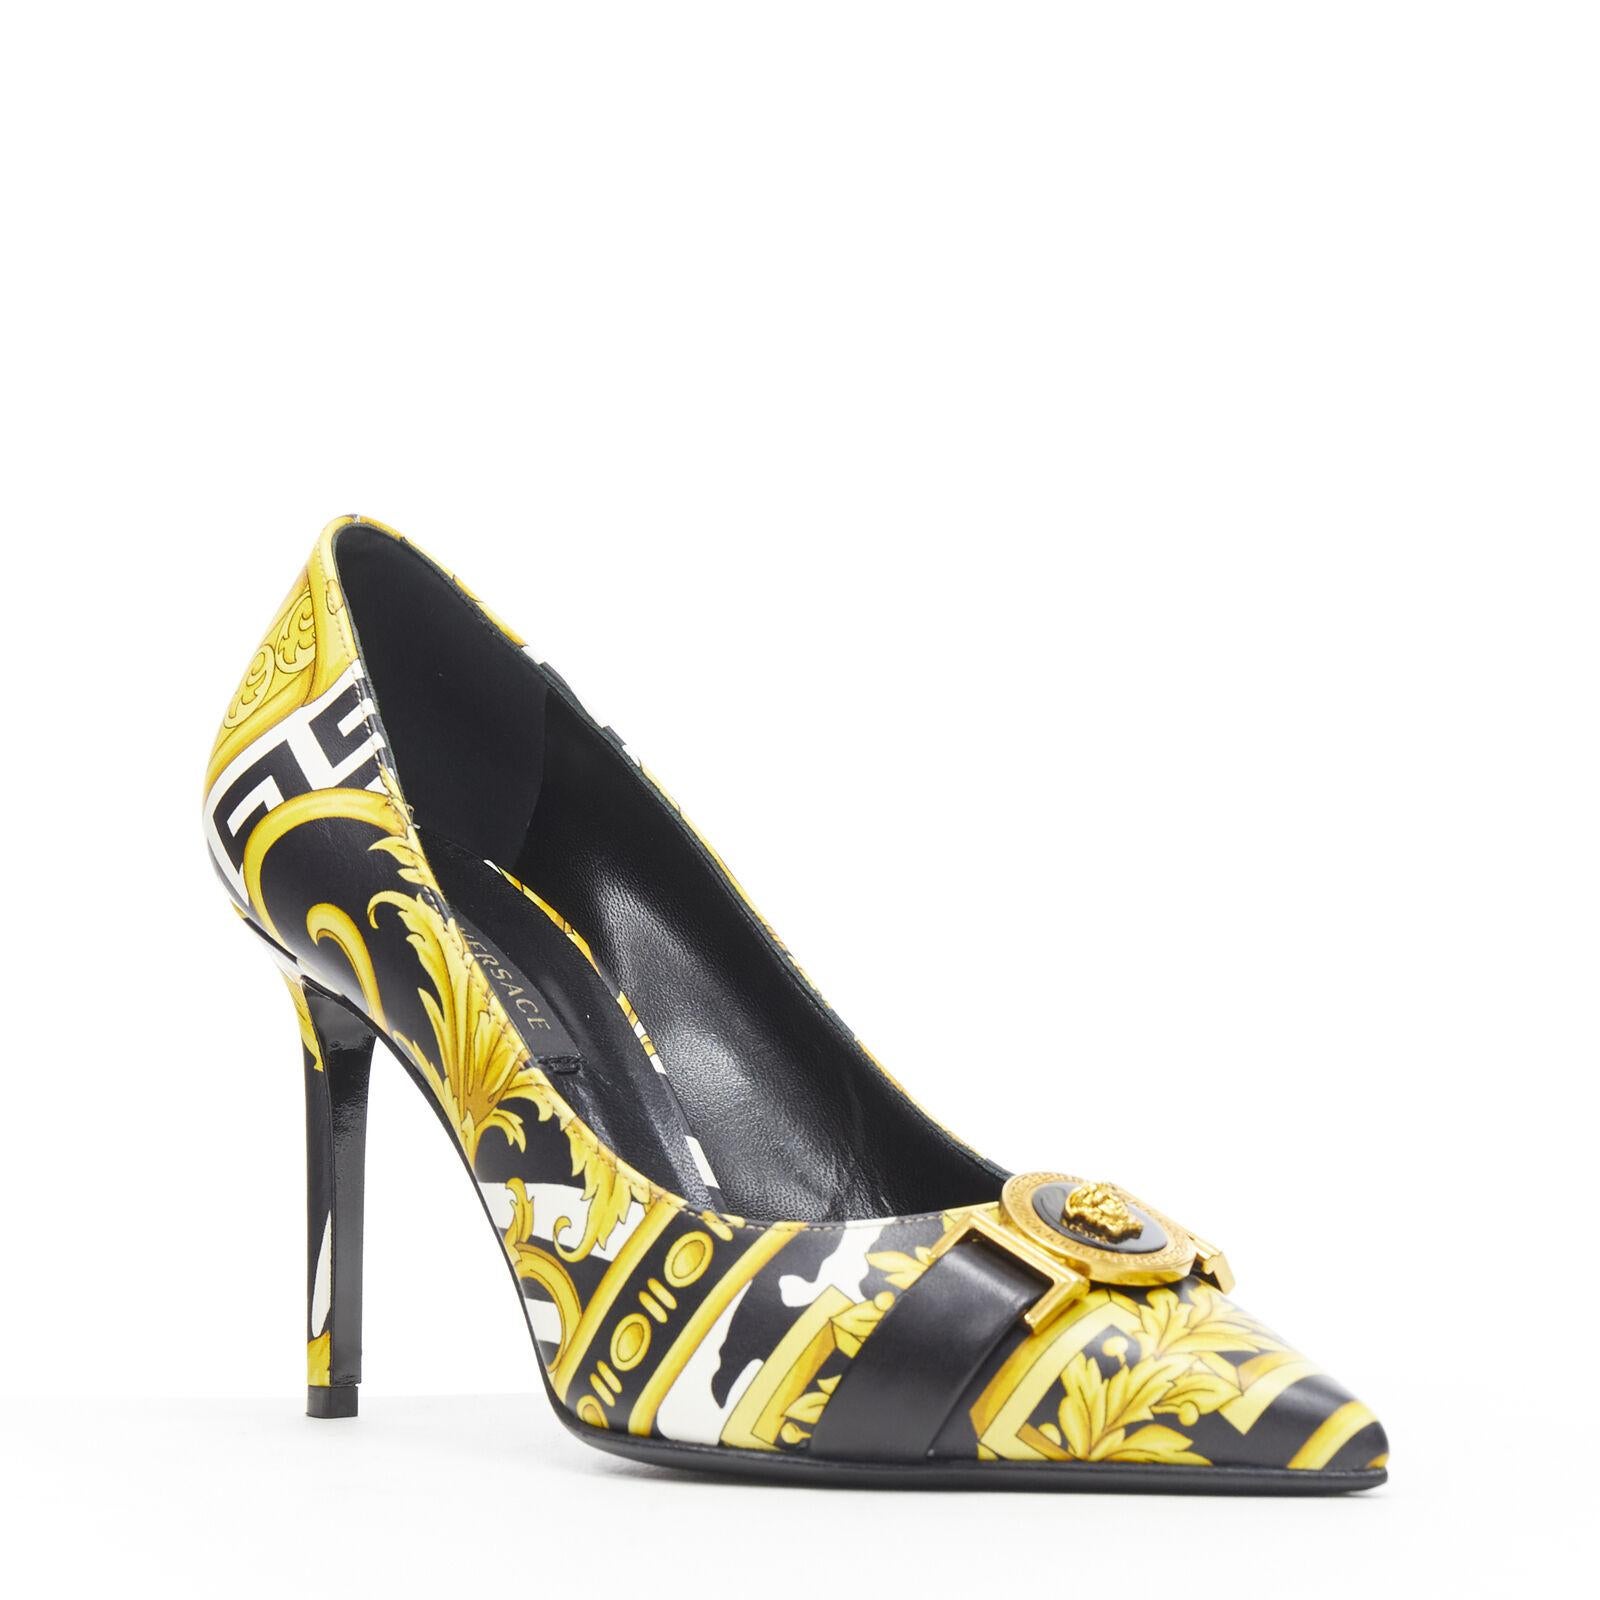 new VERSACE Savage Wild Barocco gold white Medusa strap pointy leather heel EU40
Reference: TGAS/B00065
Brand: Versace
Designer: Donatella Versace
Model: Baroque pump
Collection: 2019
Material: Leather
Color: Gold, Black
Pattern: Floral
Extra